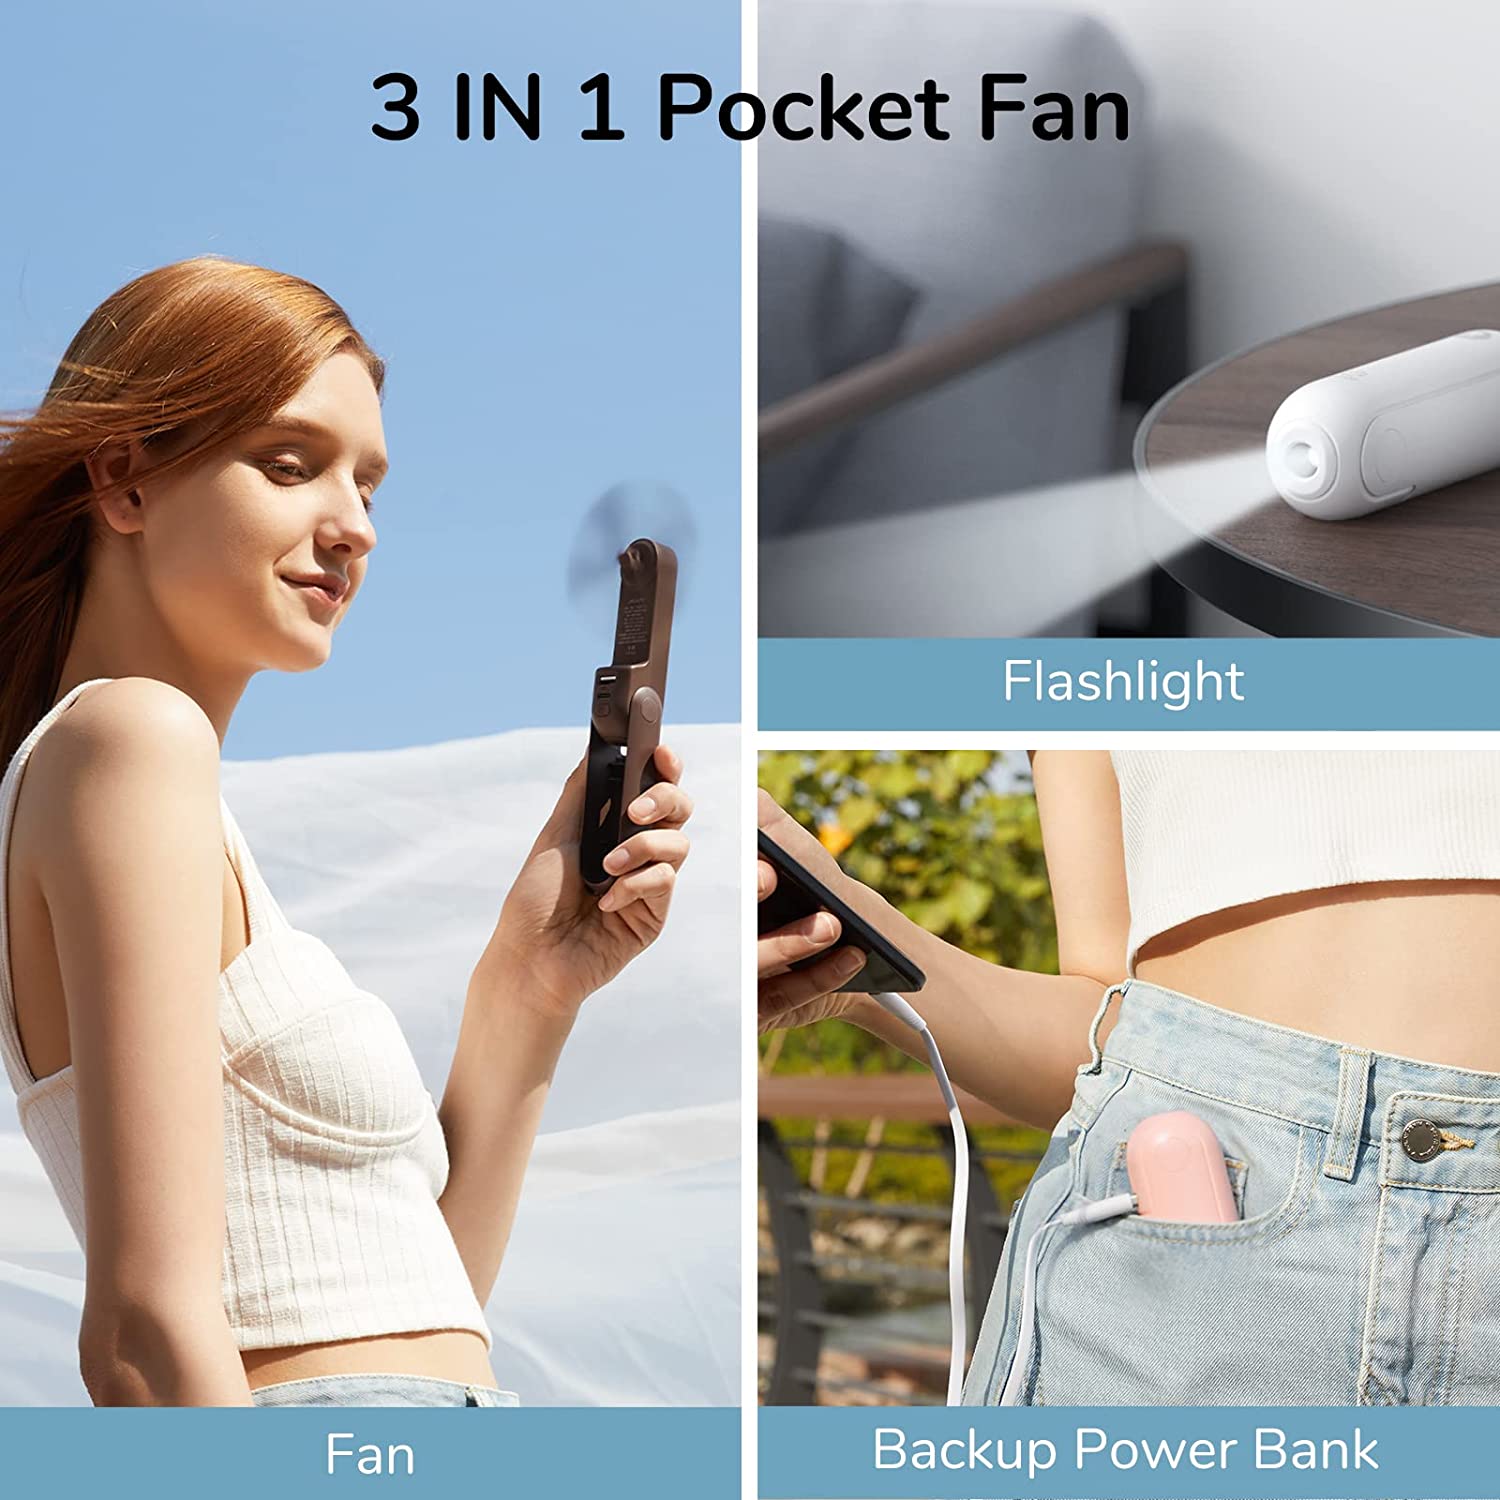 Handheld Mini Fan, 3 in 1 Hand Fan, Portable USB Rechargeable Small Pocket Fan, Battery Operated Fan [14-21 Working Hours] with Power Bank, Flashlight Feature for Women,Travel,Outdoor-White, 1 Count (Pack of 1)